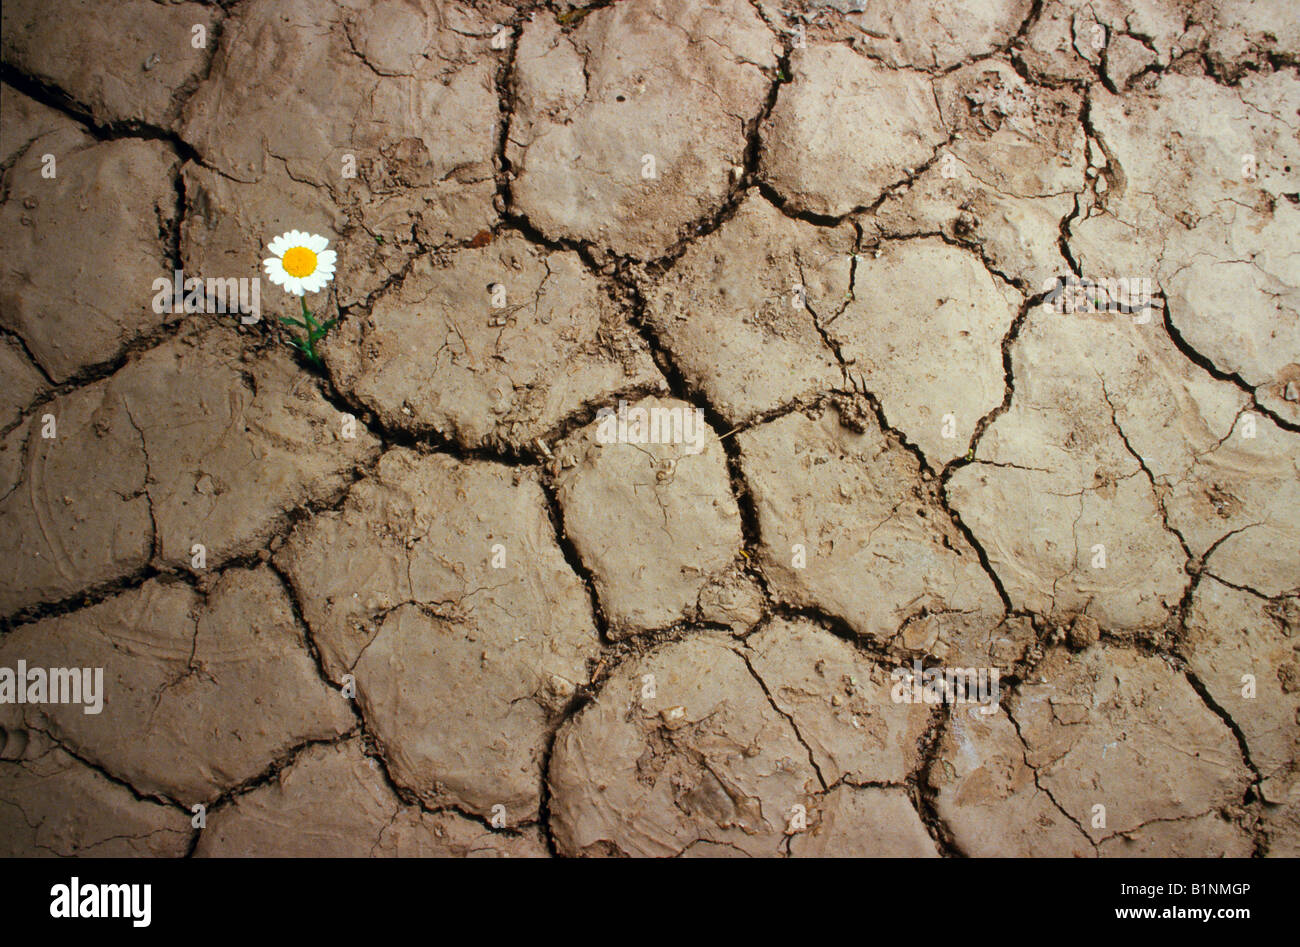 A flower grows in cracked earth during a drought Stock Photo